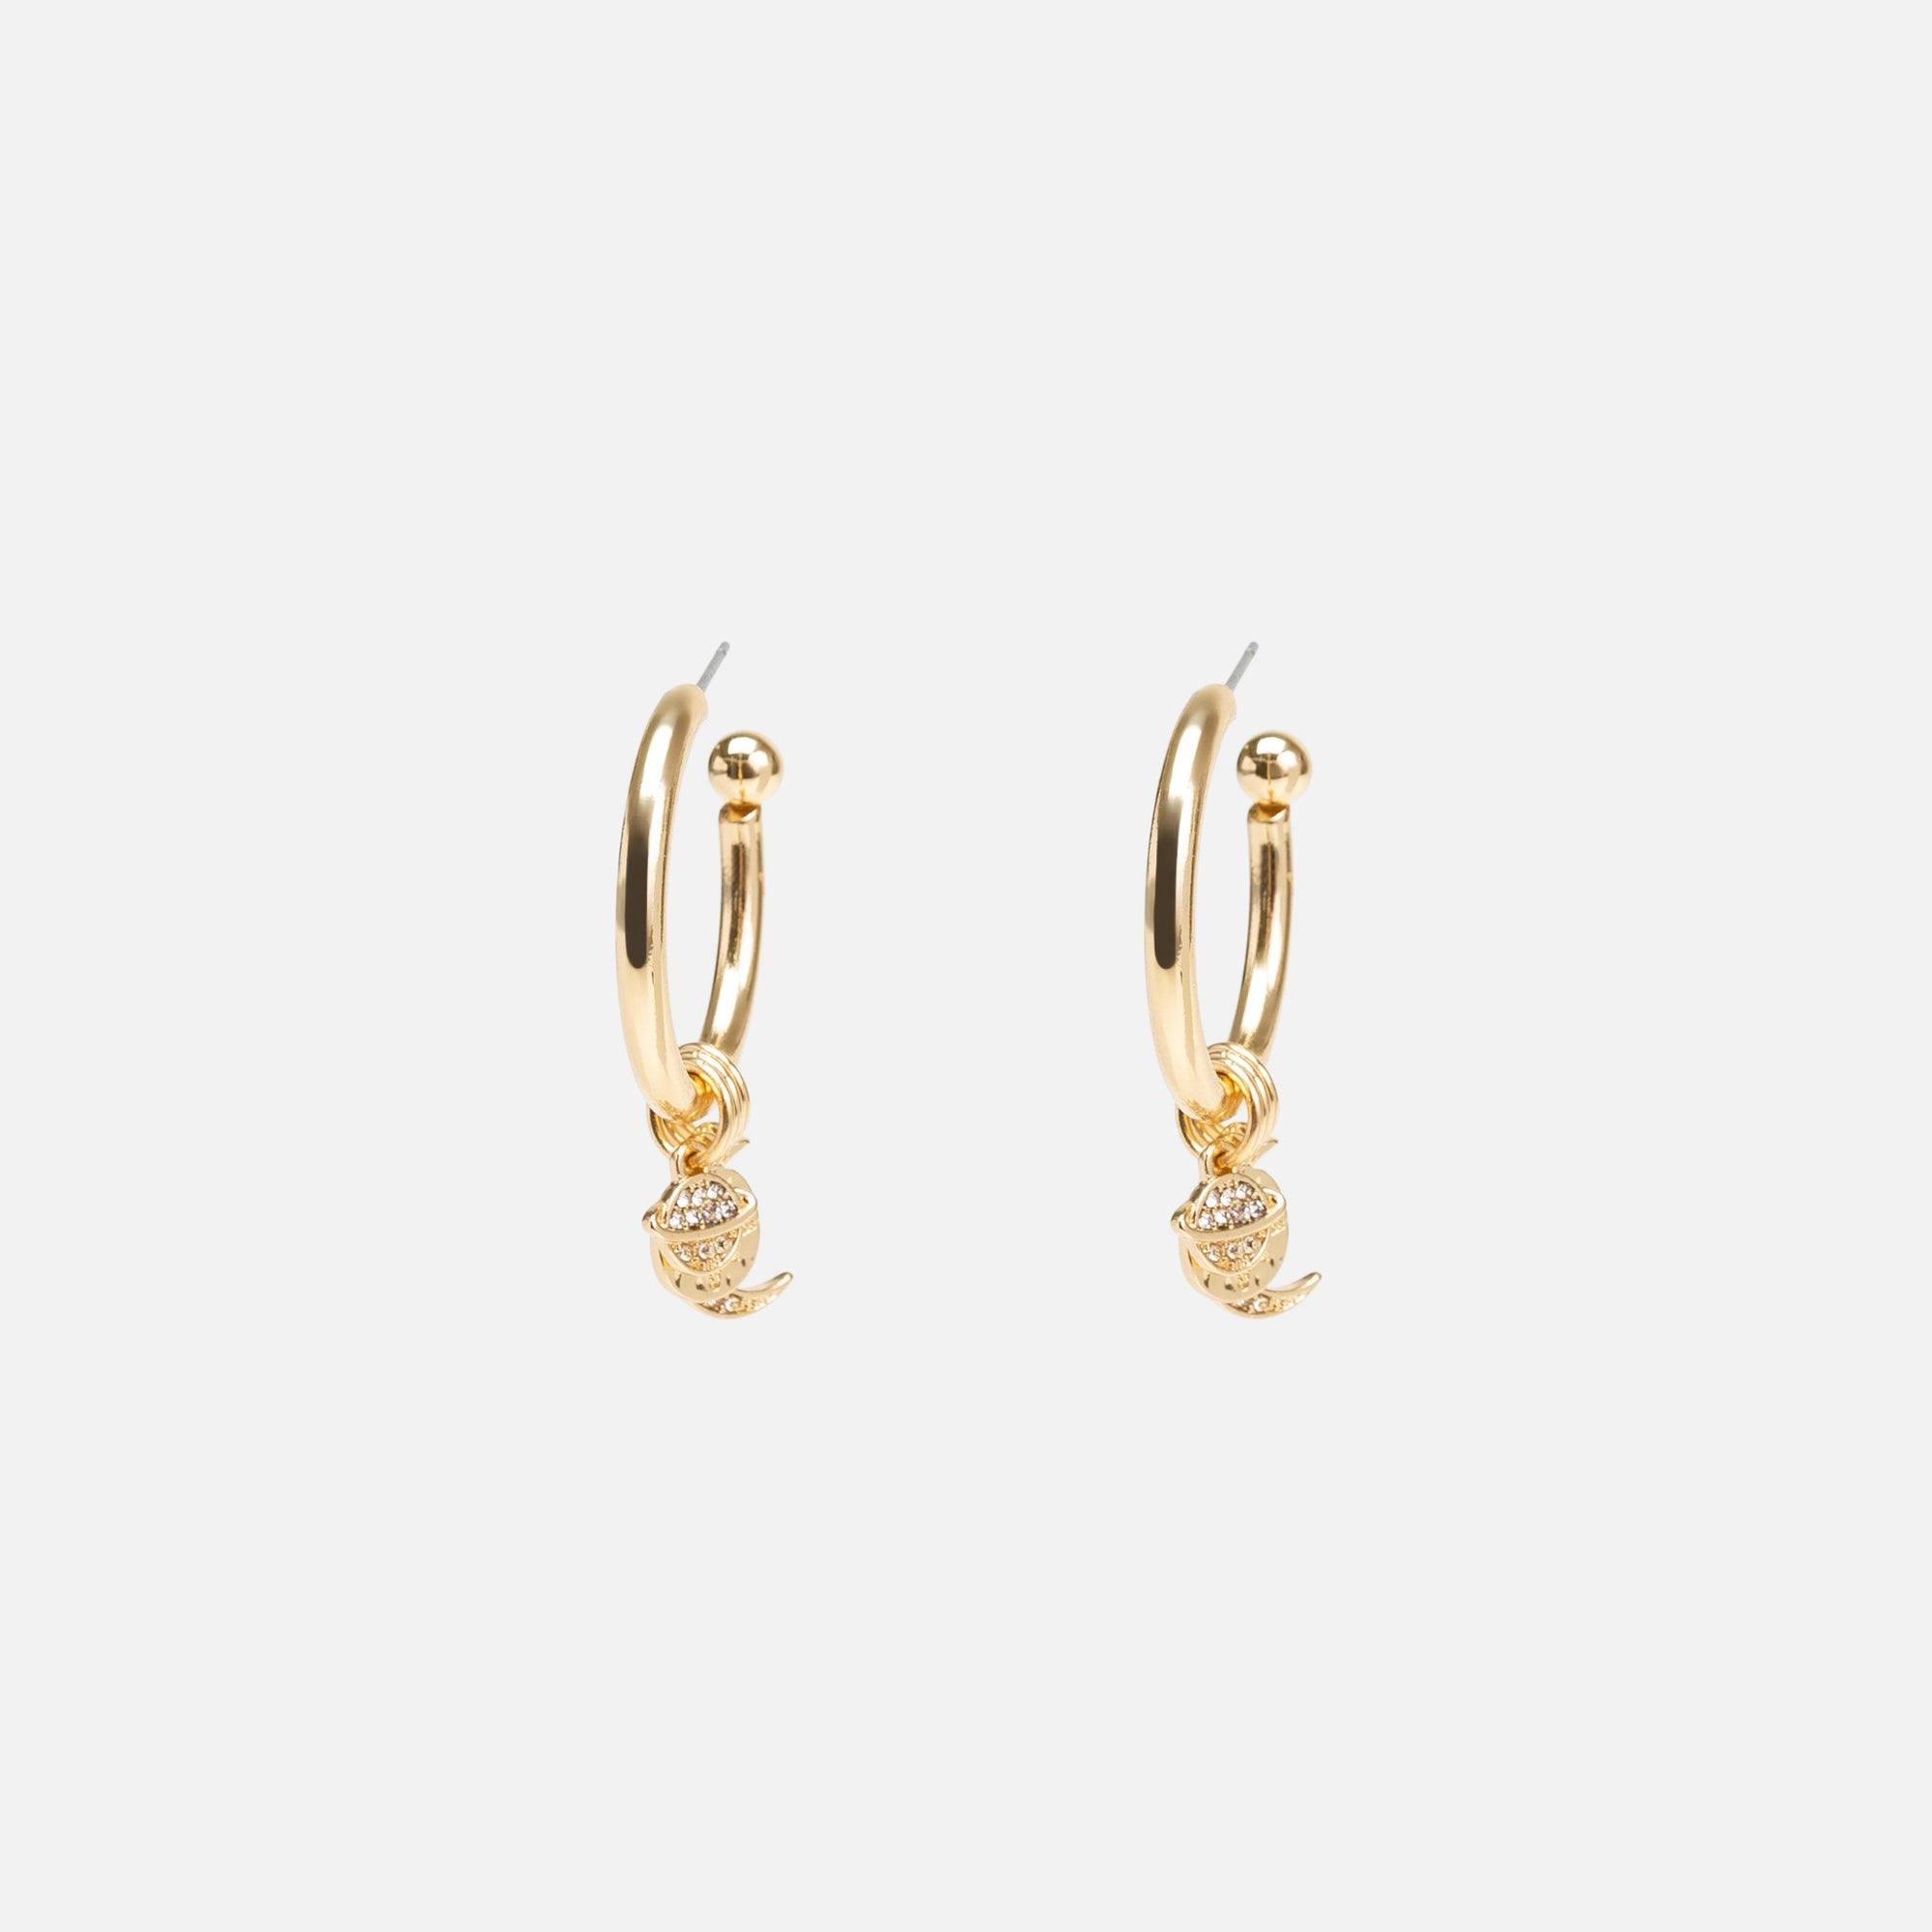 Golden hoop earrings with three charms